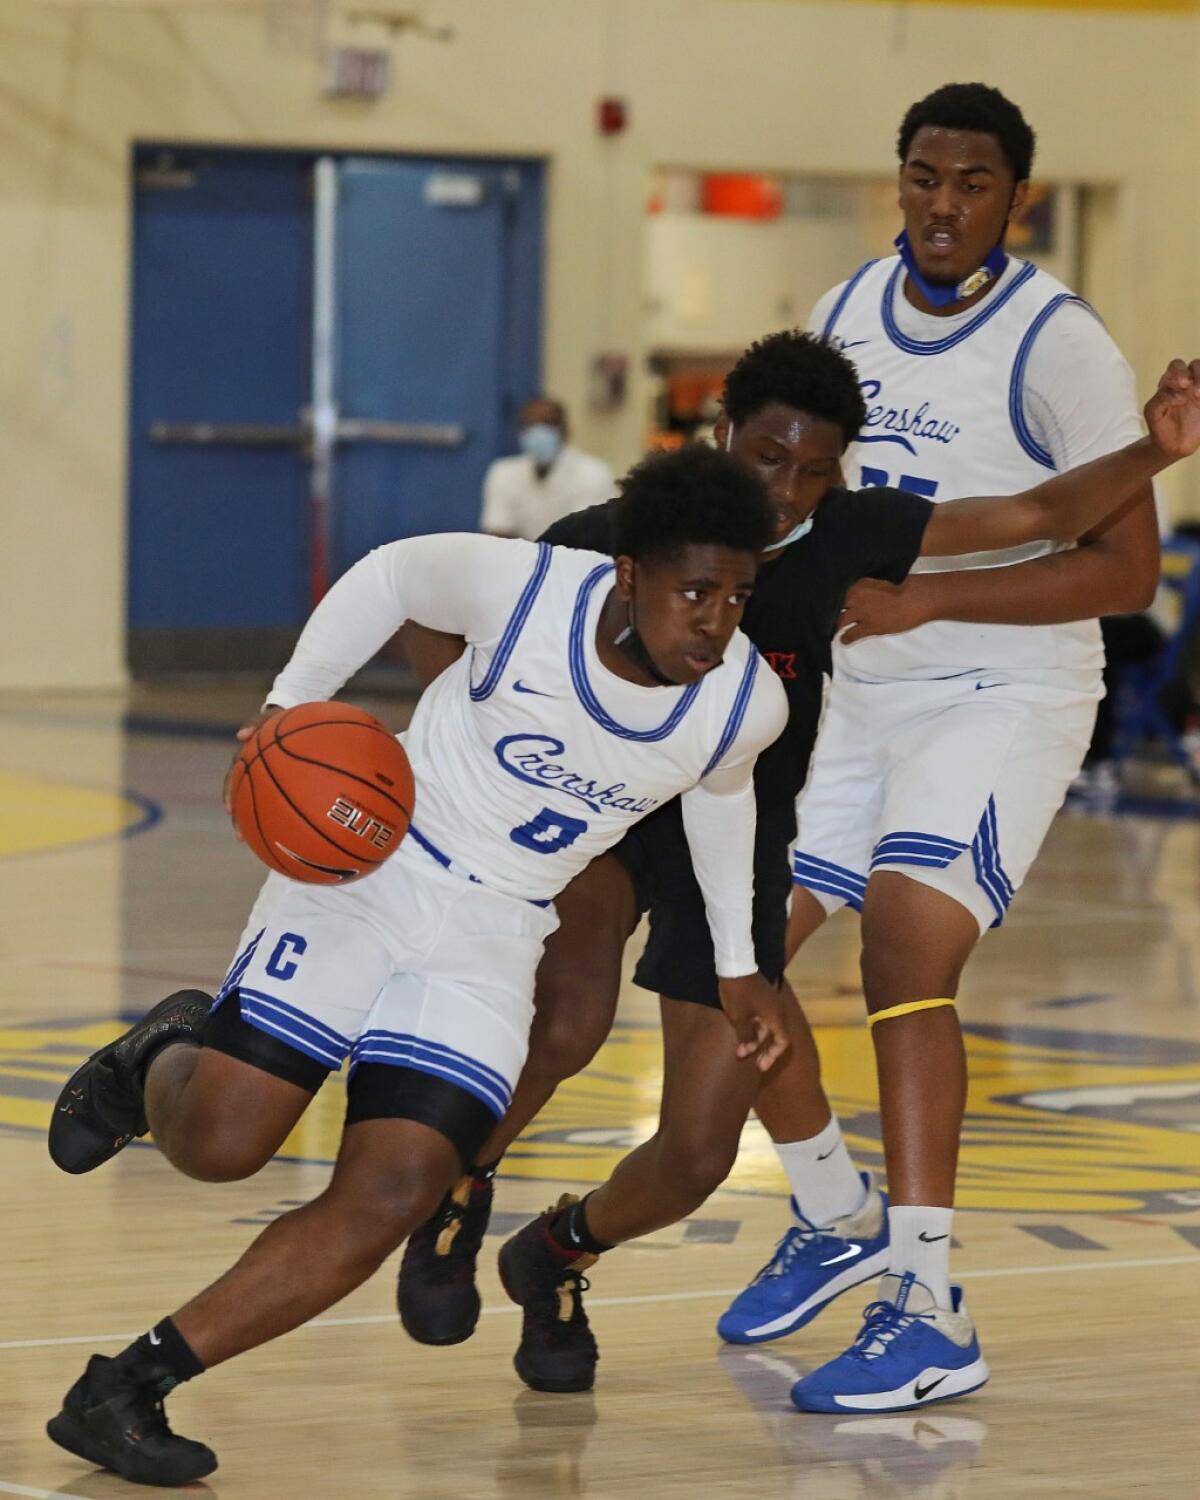 Kevin Bradley of Crenshaw drives against View Park Prep in a high school basketball game.